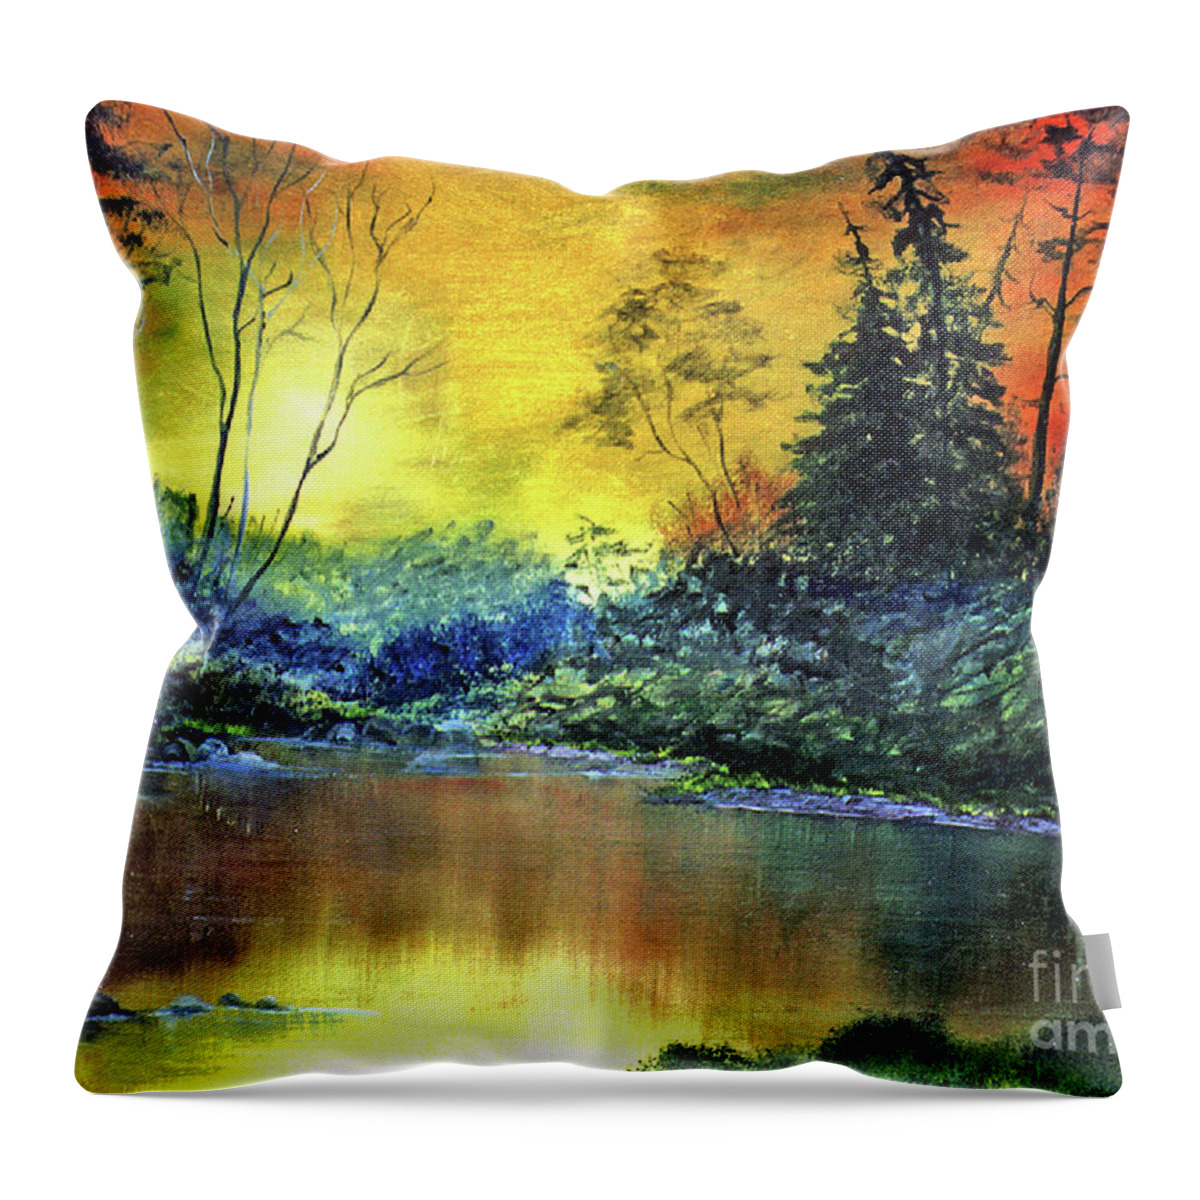 Ebsq Throw Pillow featuring the painting Wooded Serenity by Dee Flouton